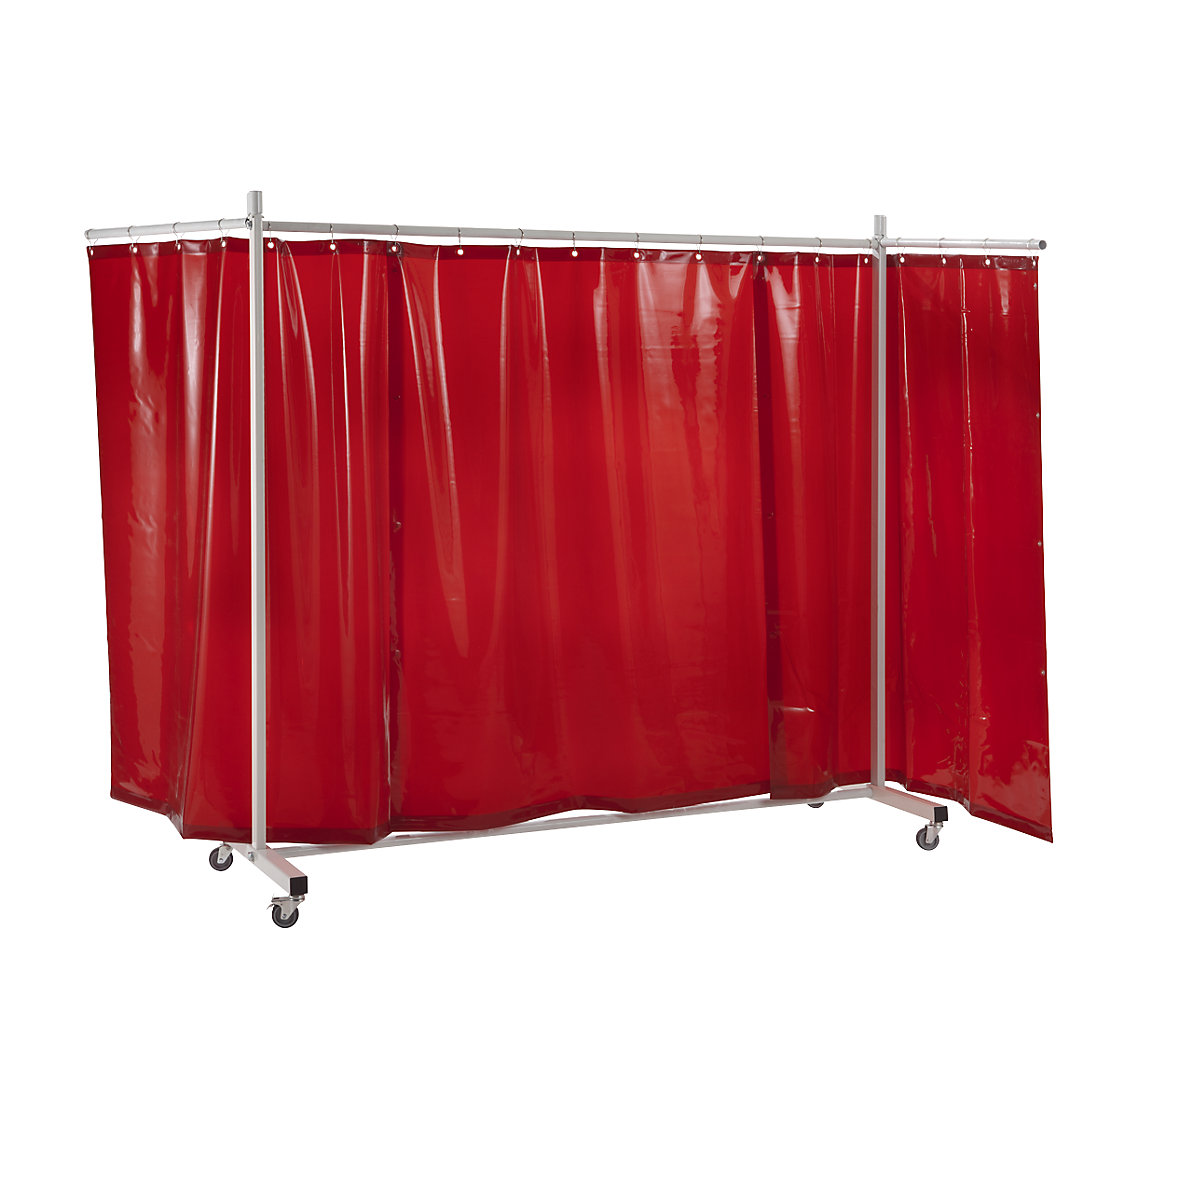 Welder's screen, mobile, with tarp curtain, red, WxH 3700 x 2100 mm, 3-part-5